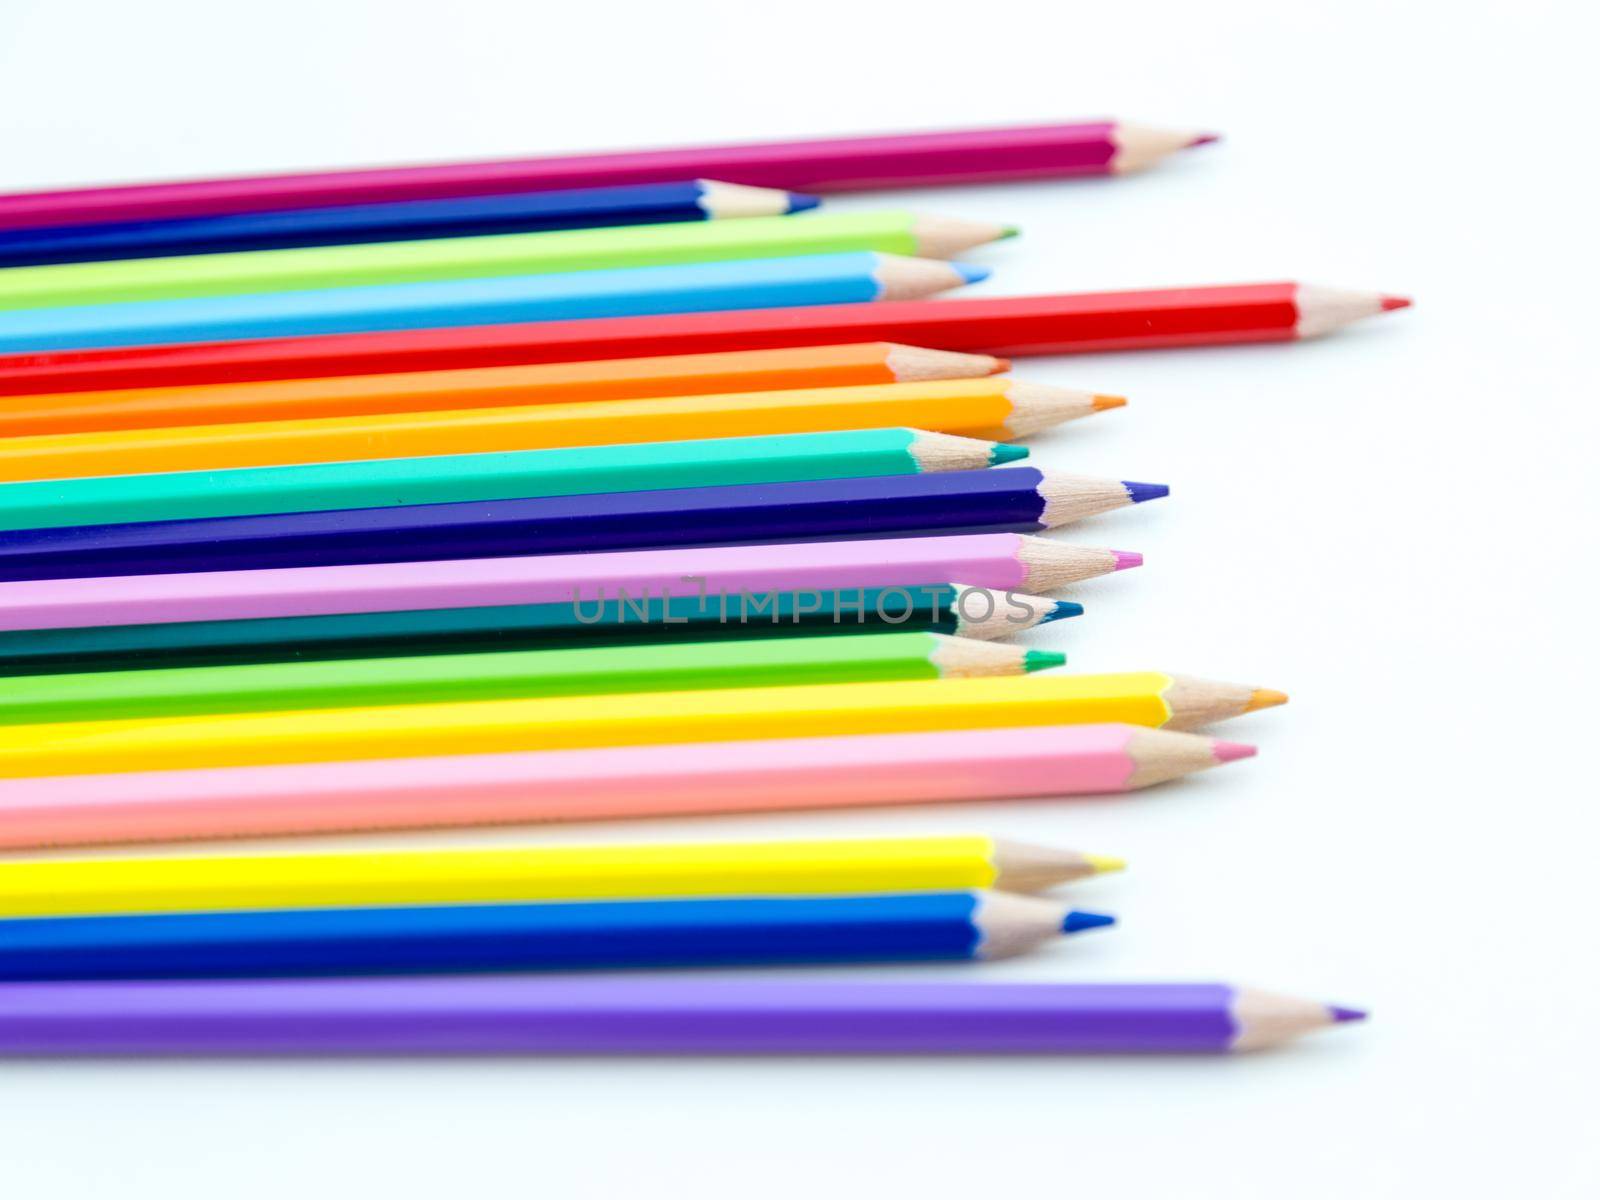 Colored pencil crayons in a row on white background